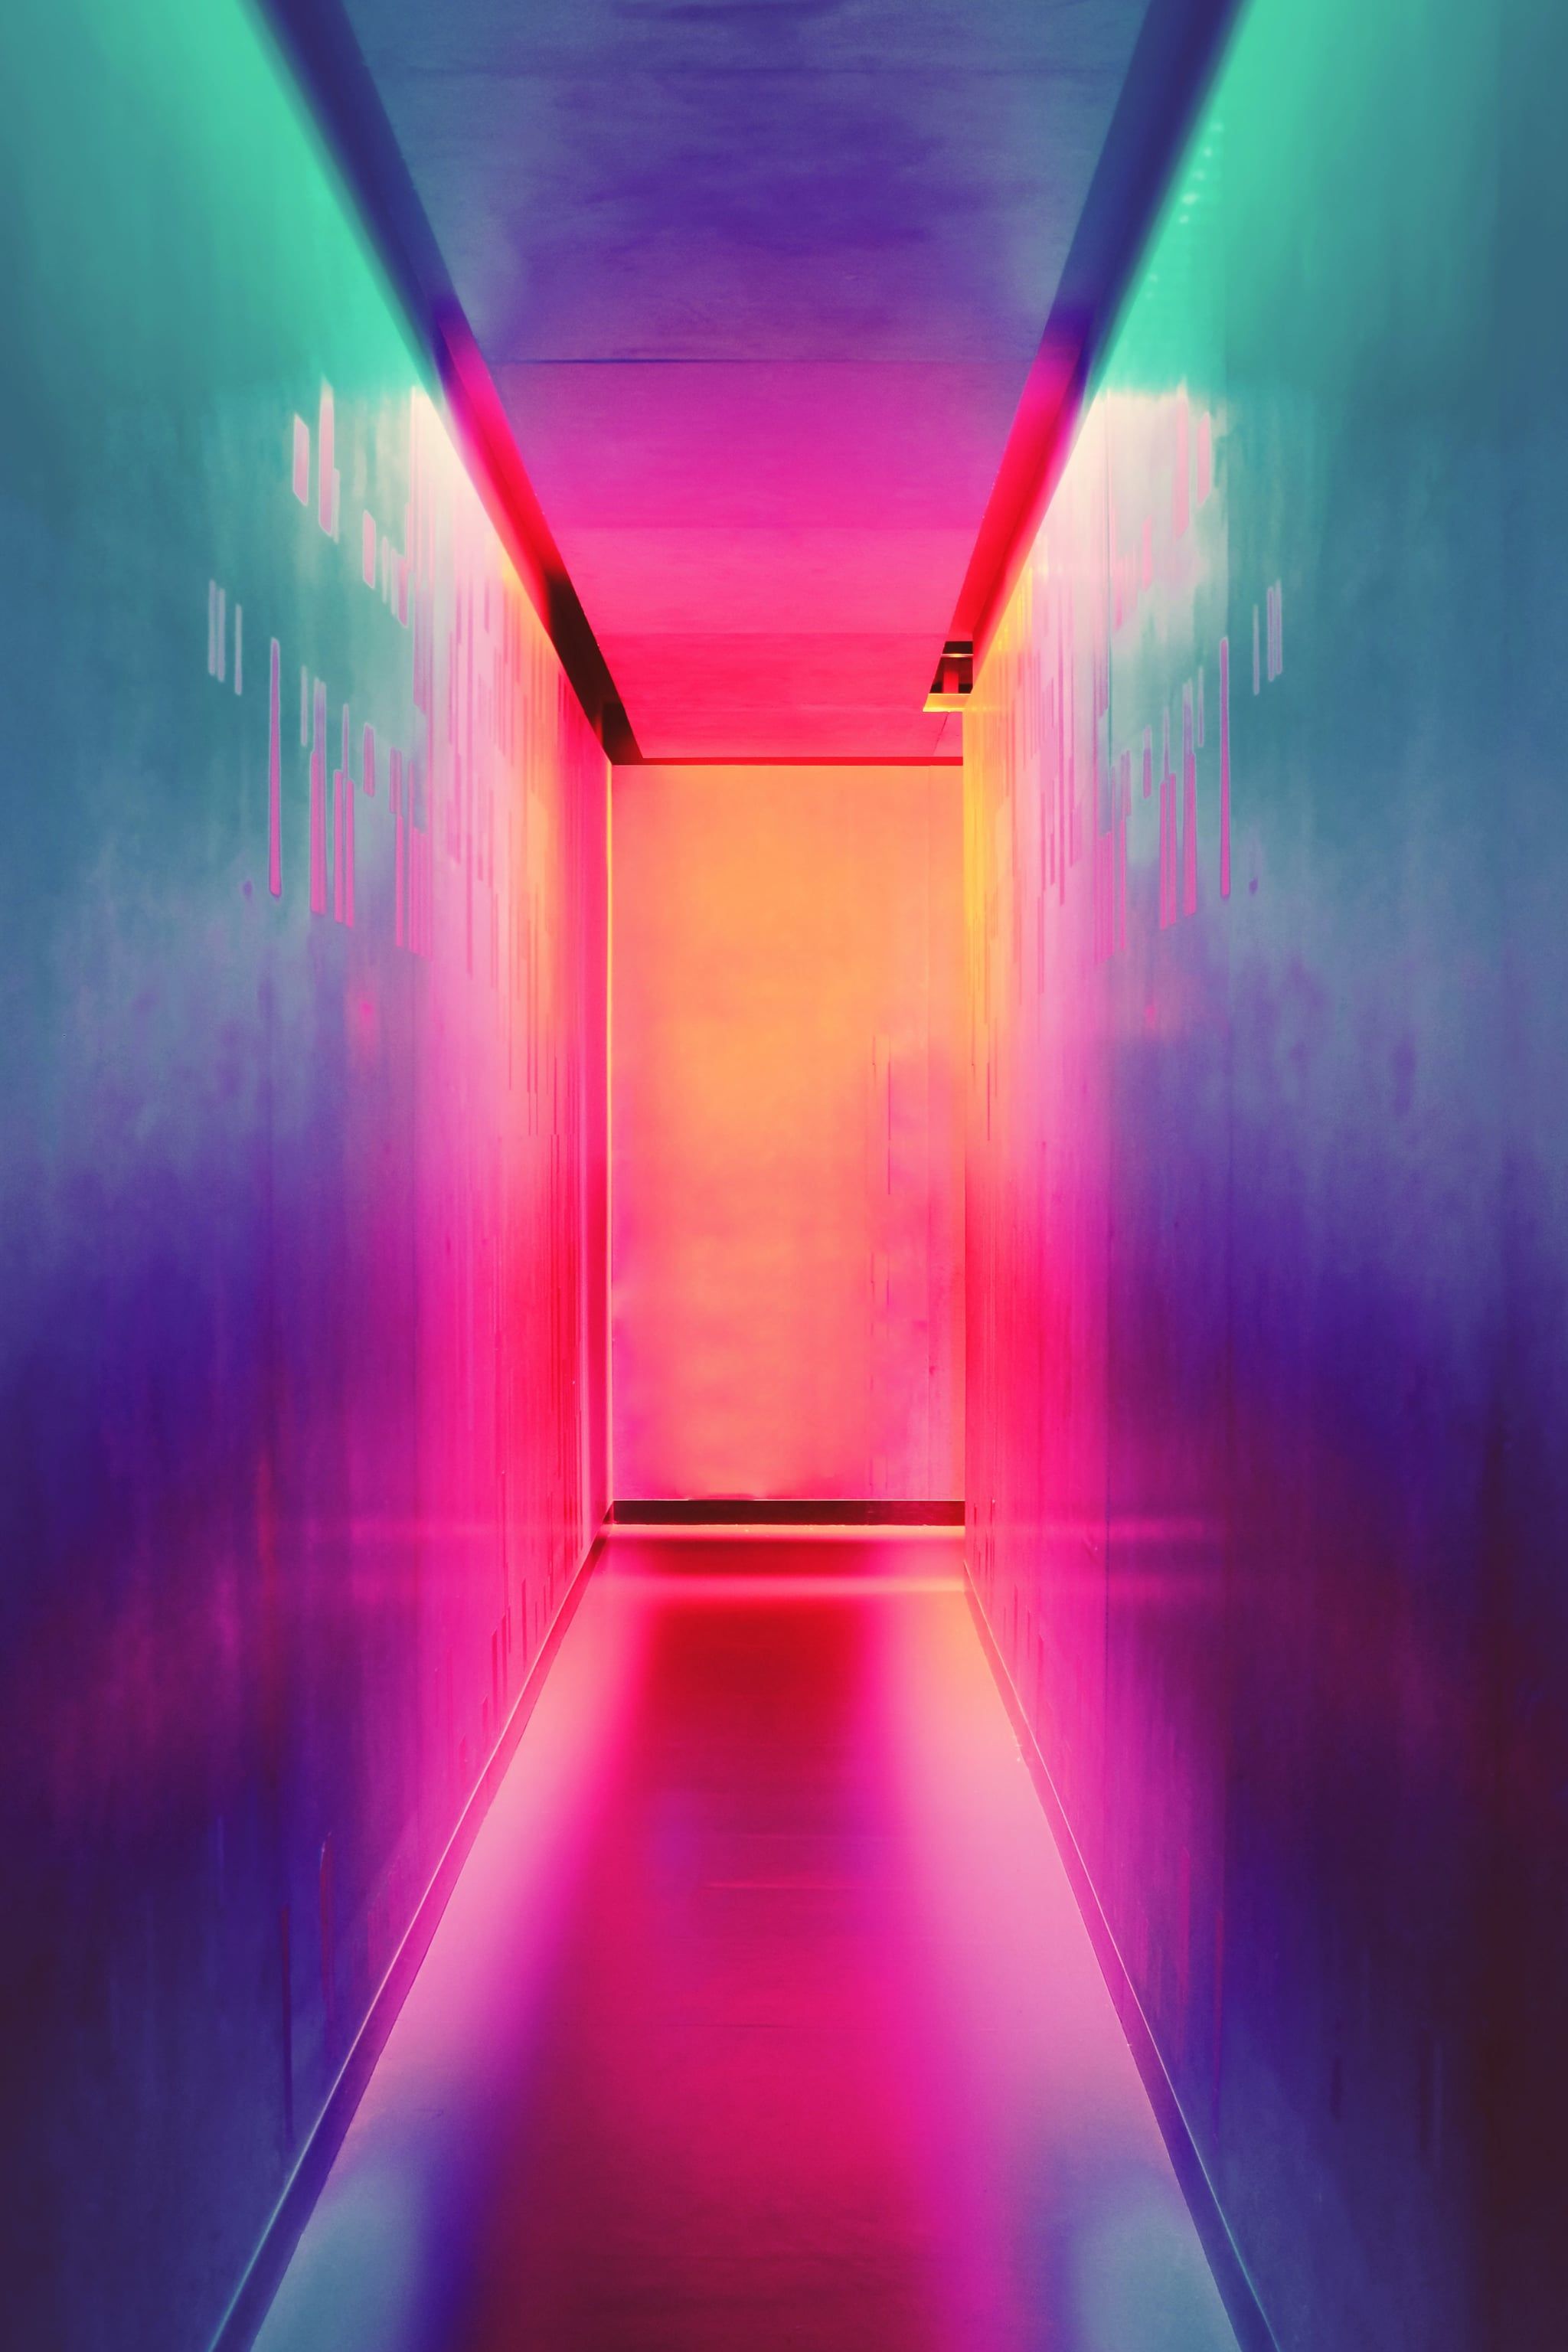 A long, narrow, colorful hallway with pink, purple, and green lighting. - Bright, neon pink